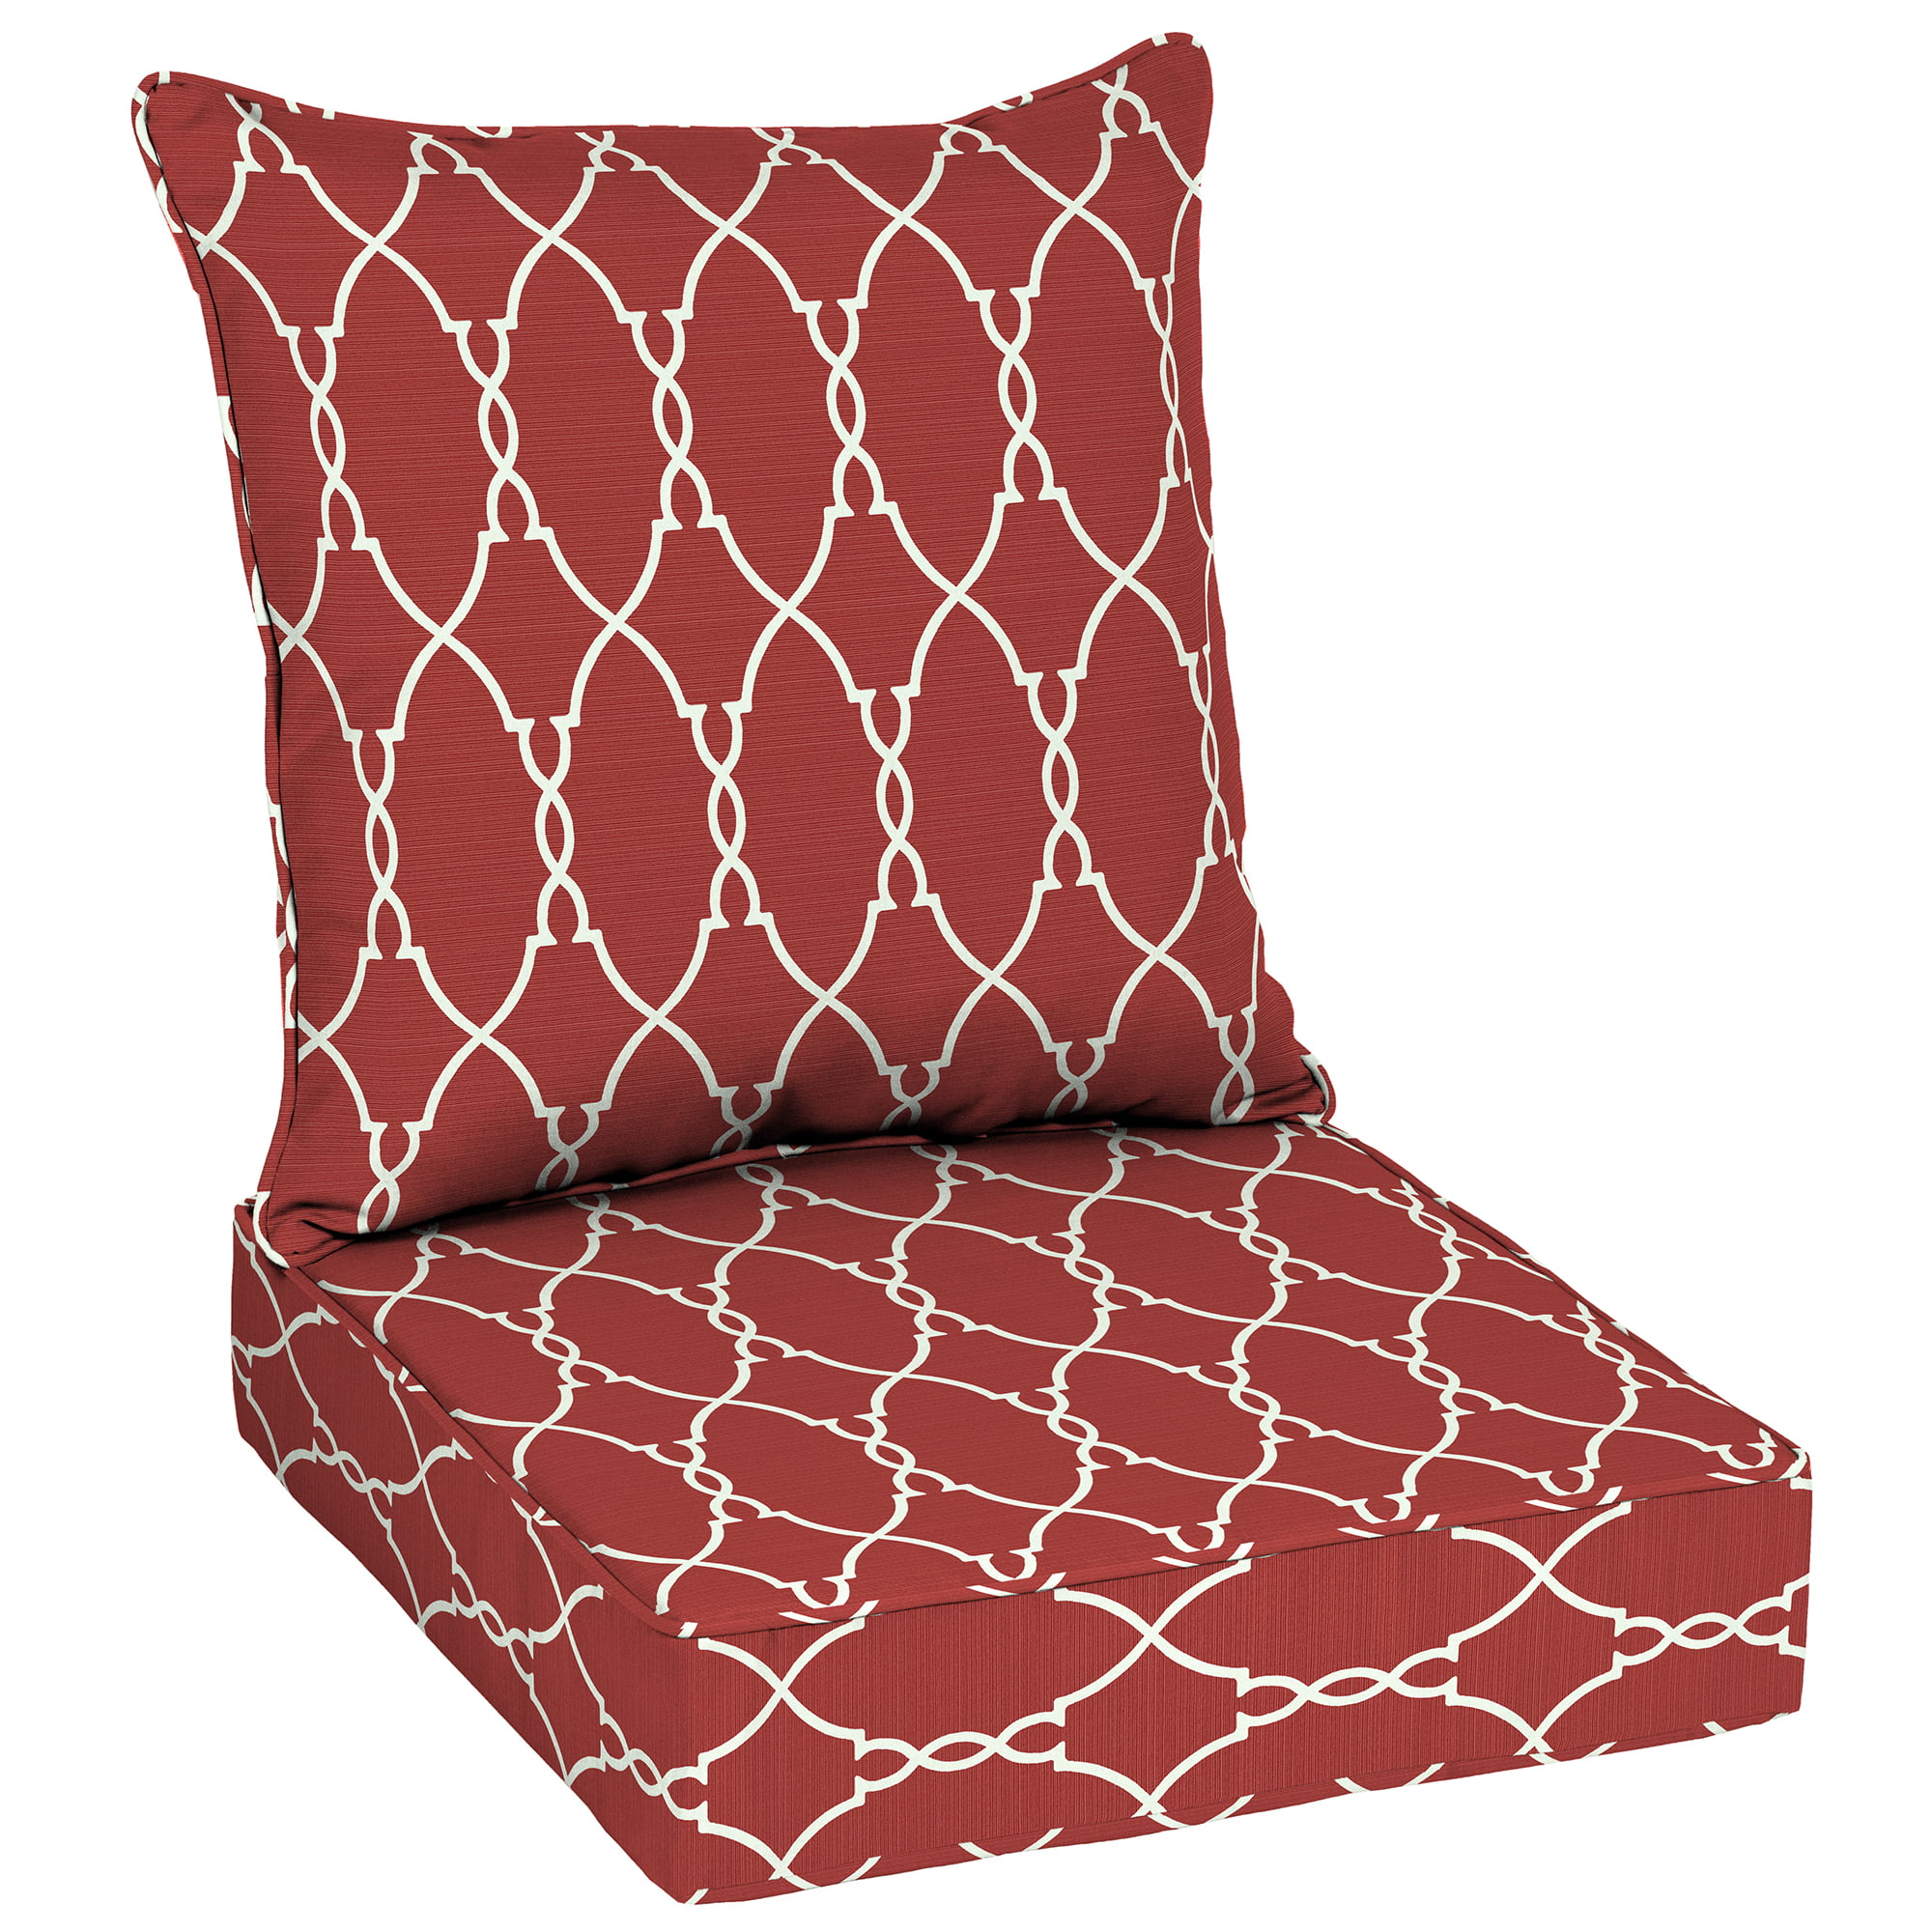 Better Homes & Gardens Red Trellis Outdoor Deep Seat Cushion Set with